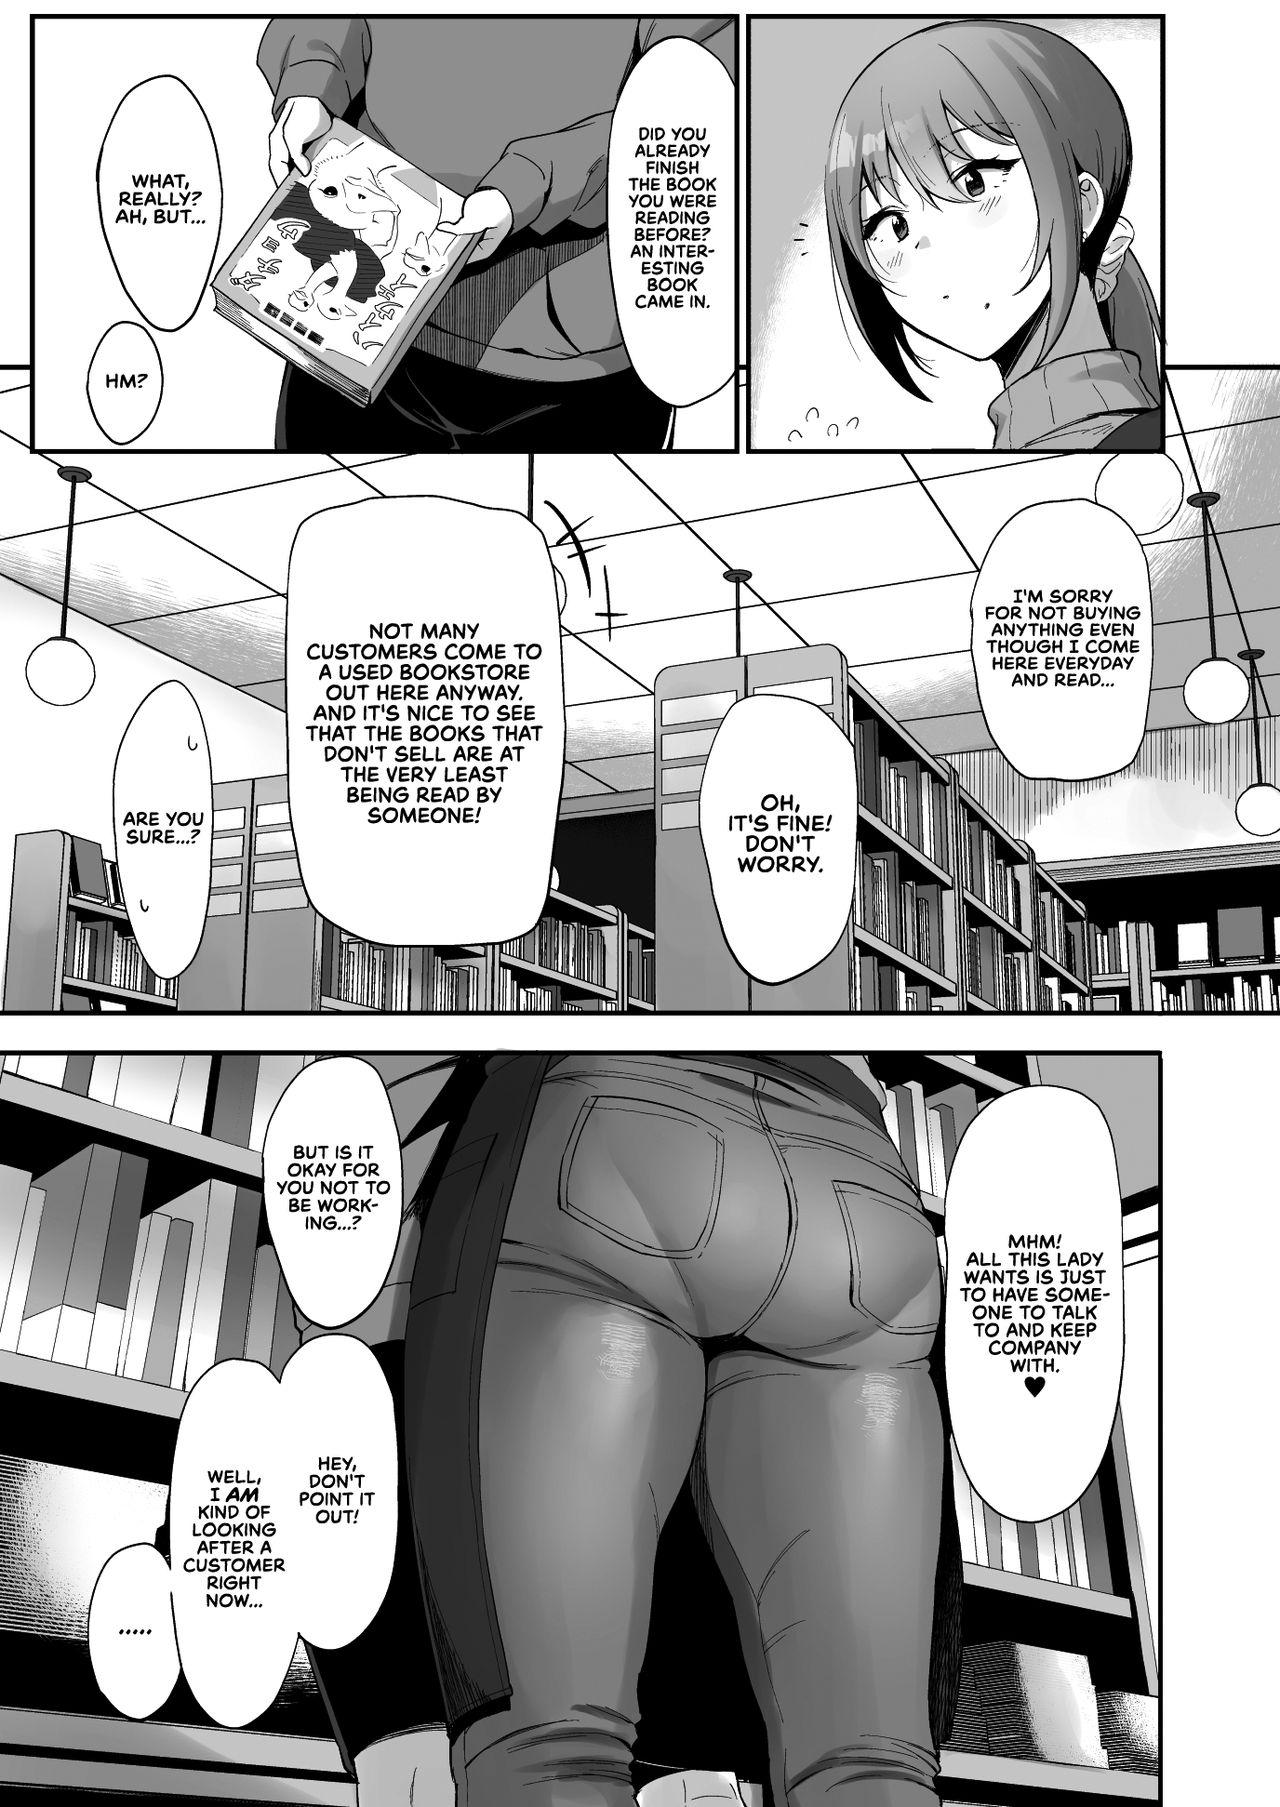 Furuhonya no Onee-san to | With The Lady From The Used Book Shop 6